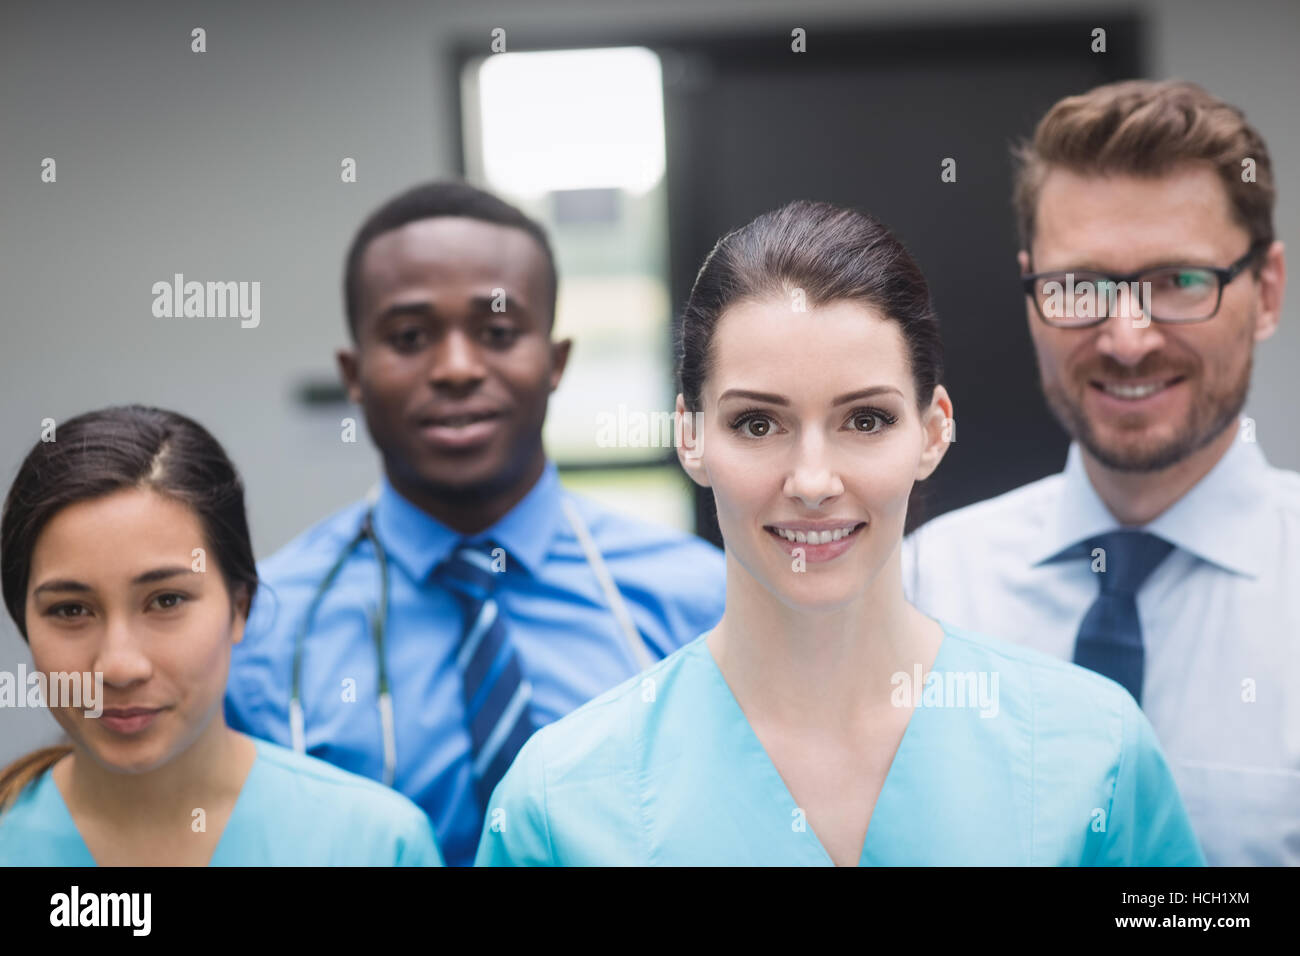 Smiling medical team standing together in hospital corridor Stock Photo